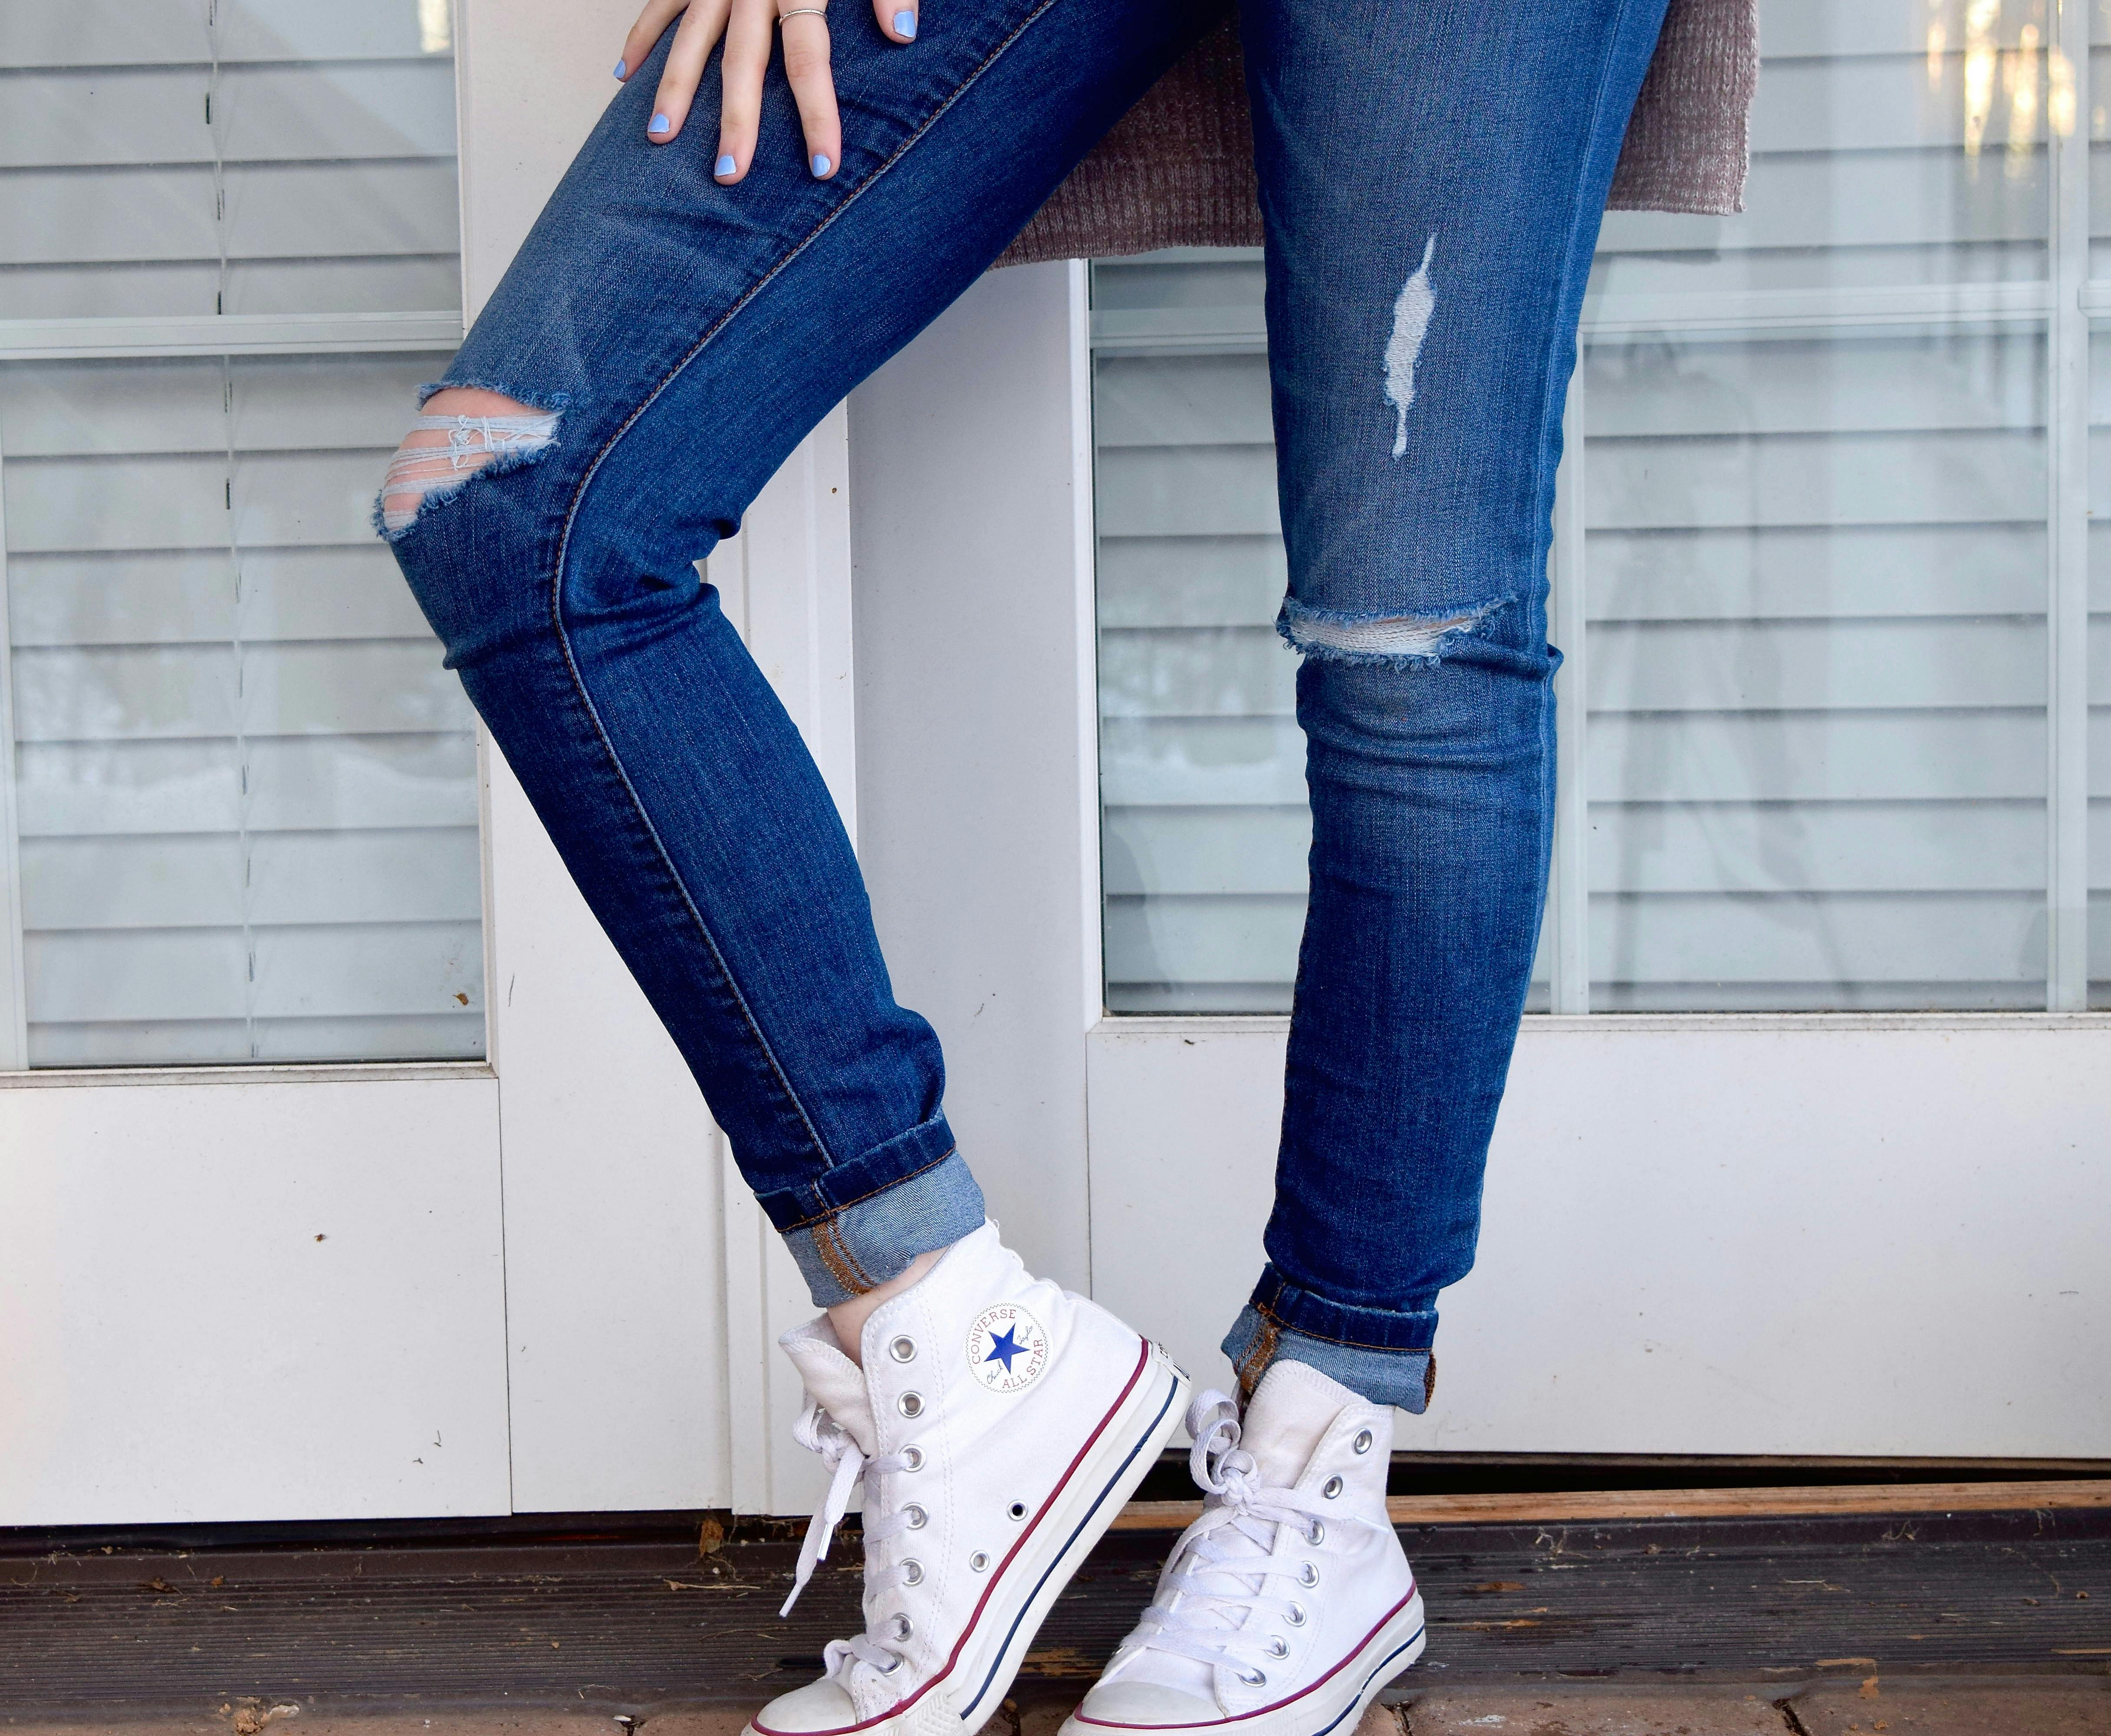 Person in Blue Denim Jeans and White Converse All Stars · Free Stock Photo